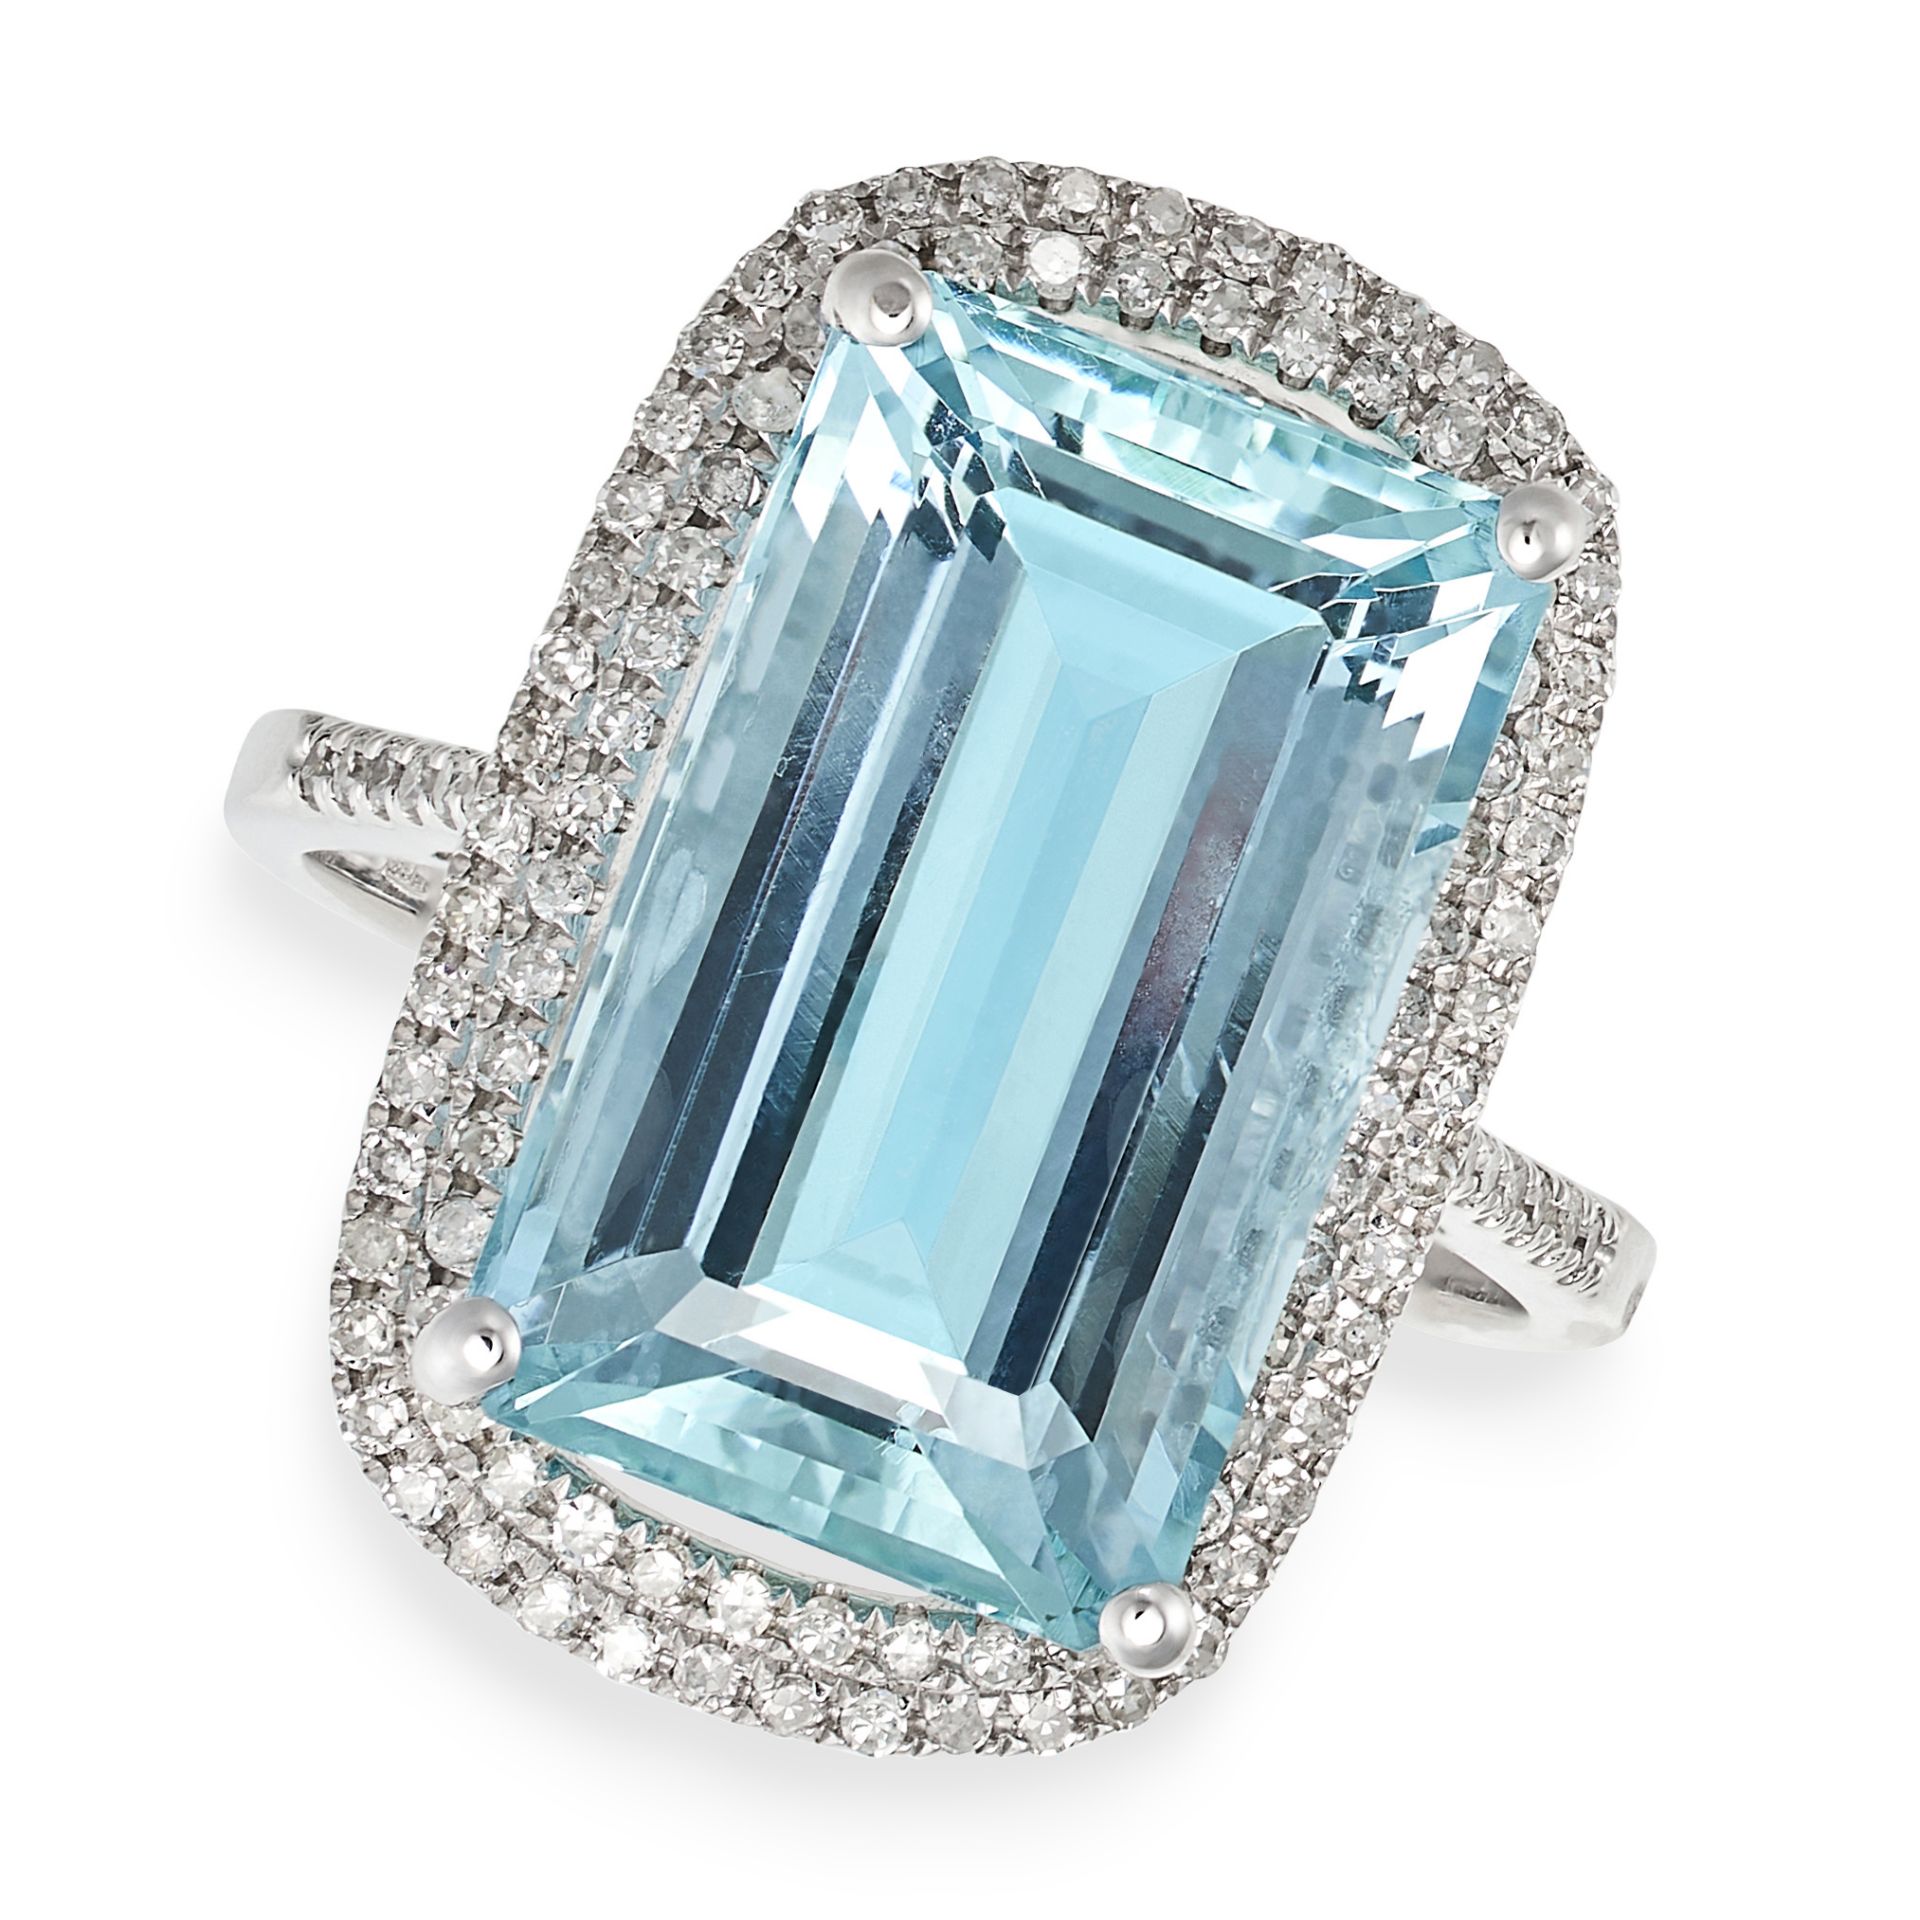 AN AQUAMARINE AND DIAMOND RING set with an octagonal step cut aquamarine of 8.71 carats in a doub...